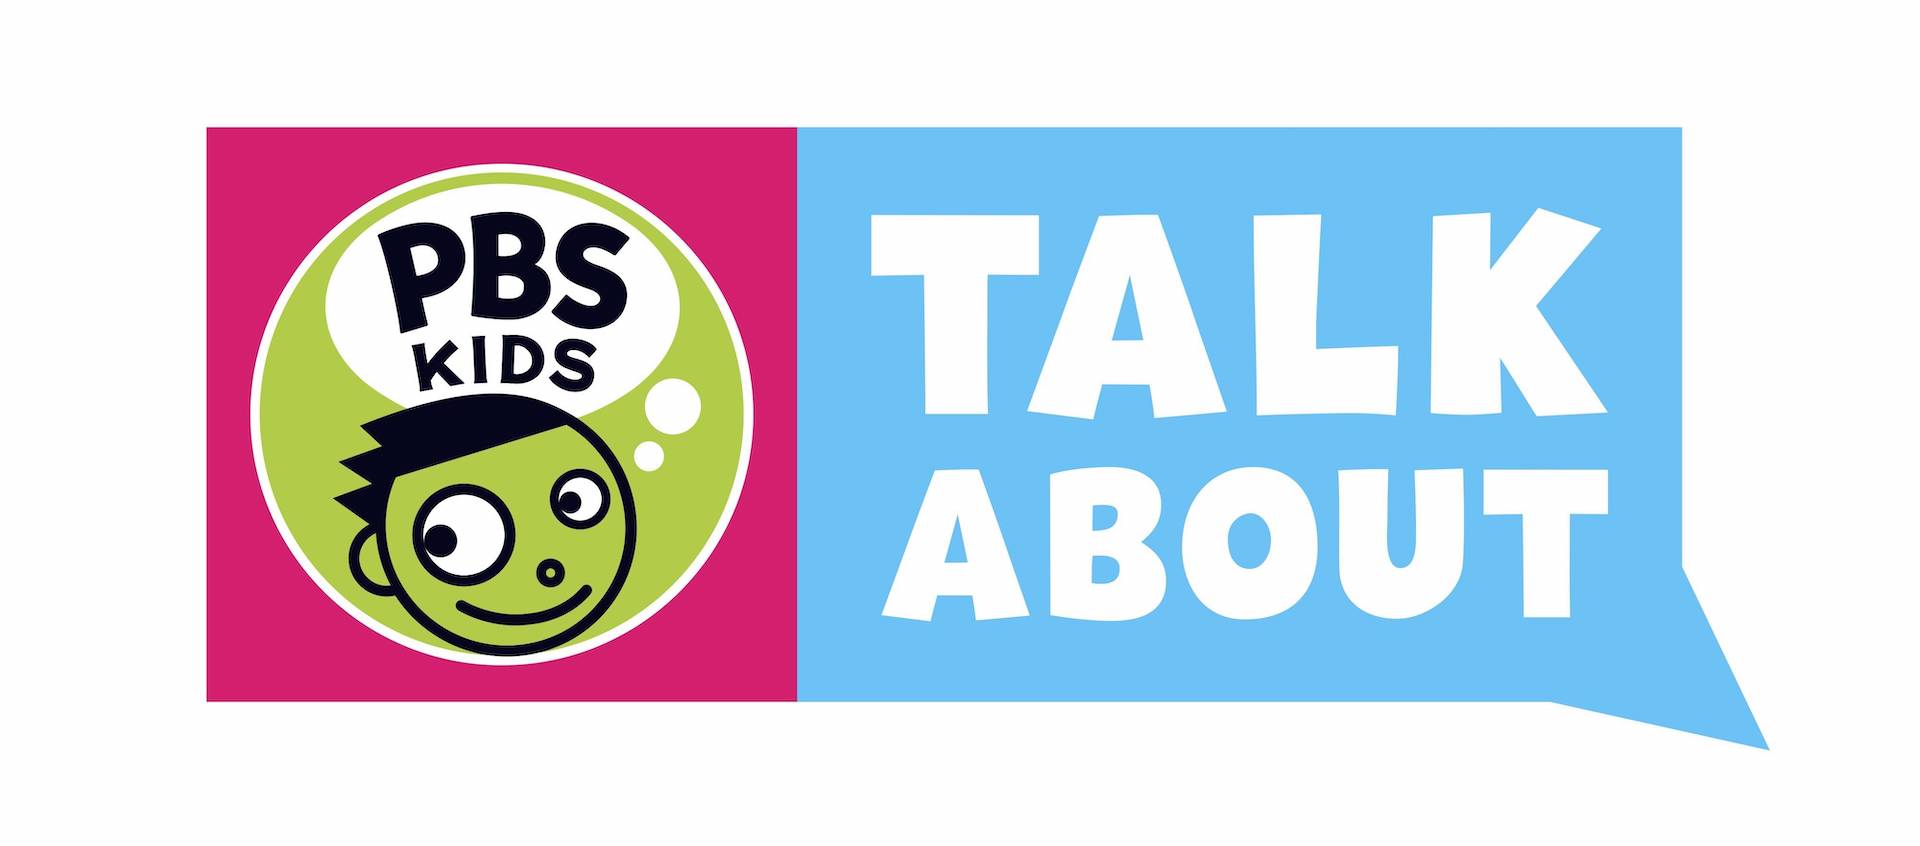 The PBS Kids logo in green, black, and white, on a rectangular word balloon field with pink behind the logo and "talk about" in white on light blue next to it